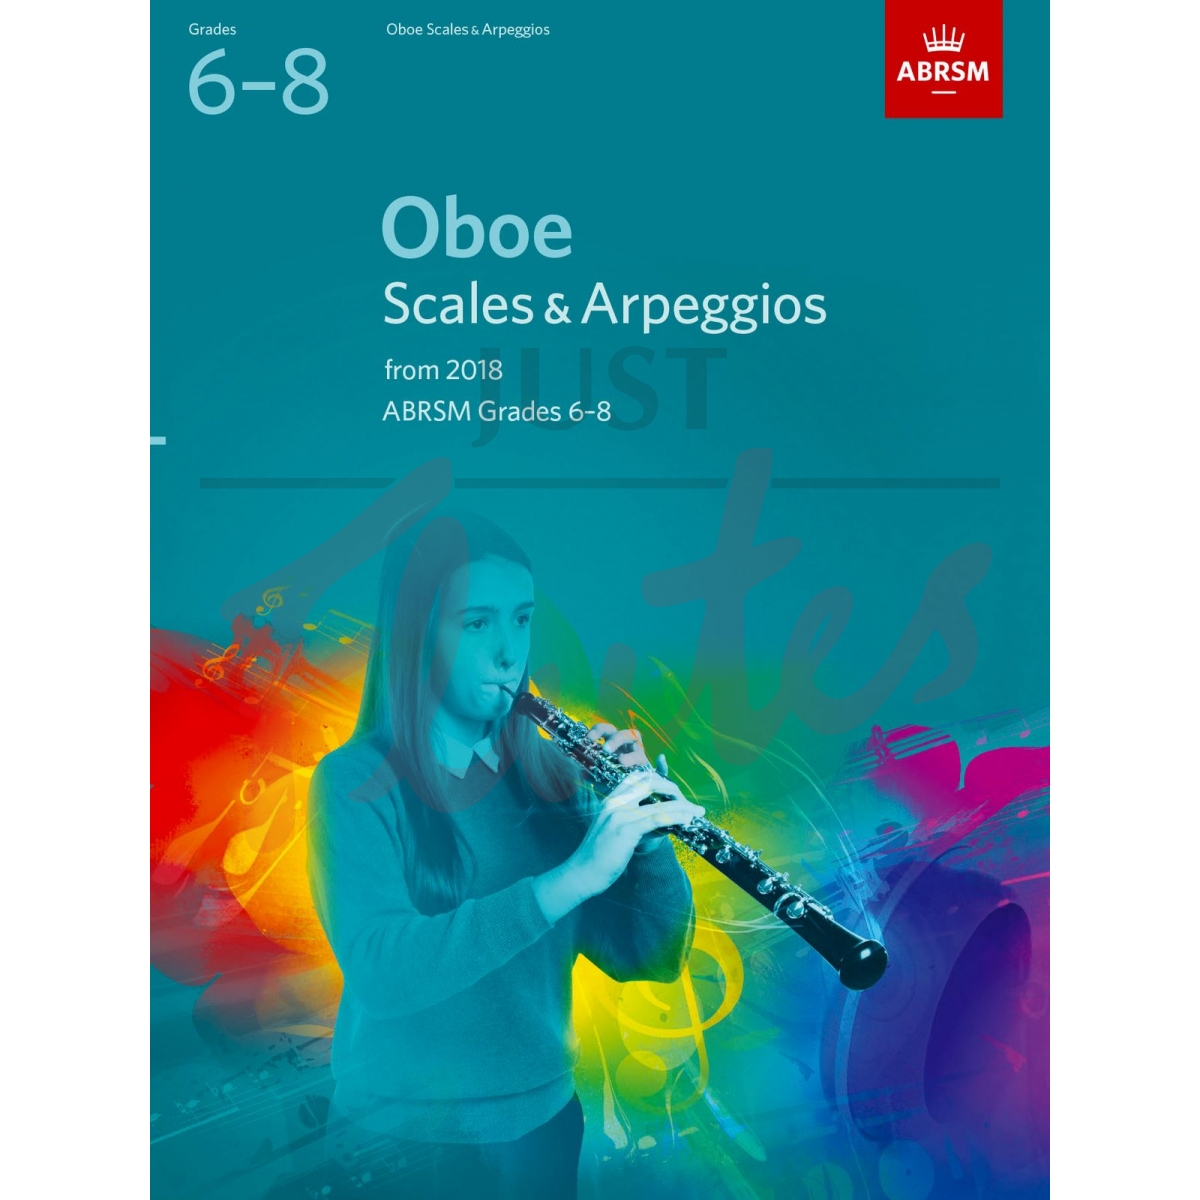 Scales &amp; Arpeggios Grades 6-8 (from 2018) for Oboe 